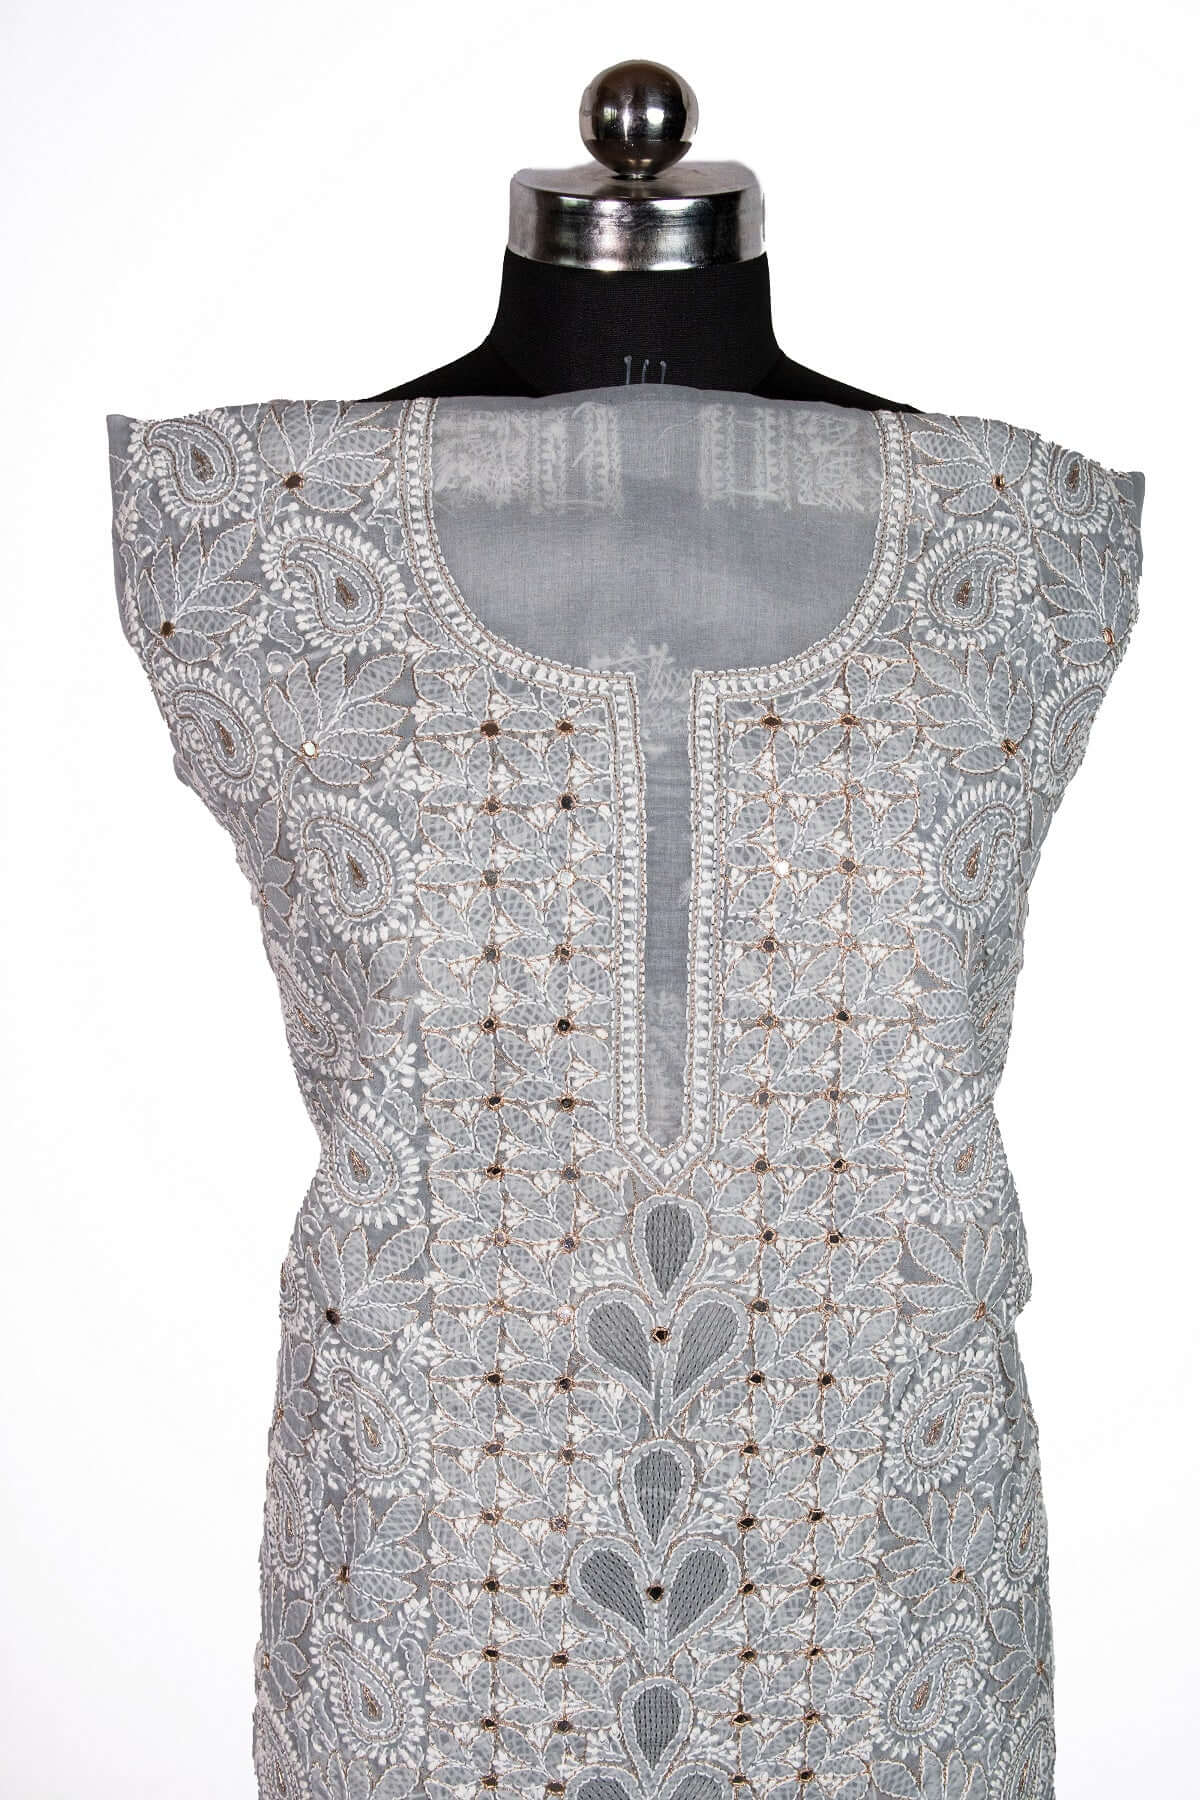 Primeangle Net/Lace Embroidered Suit Fabric Price in India - Buy Primeangle  Net/Lace Embroidered Suit Fabric online at Flipkart.com